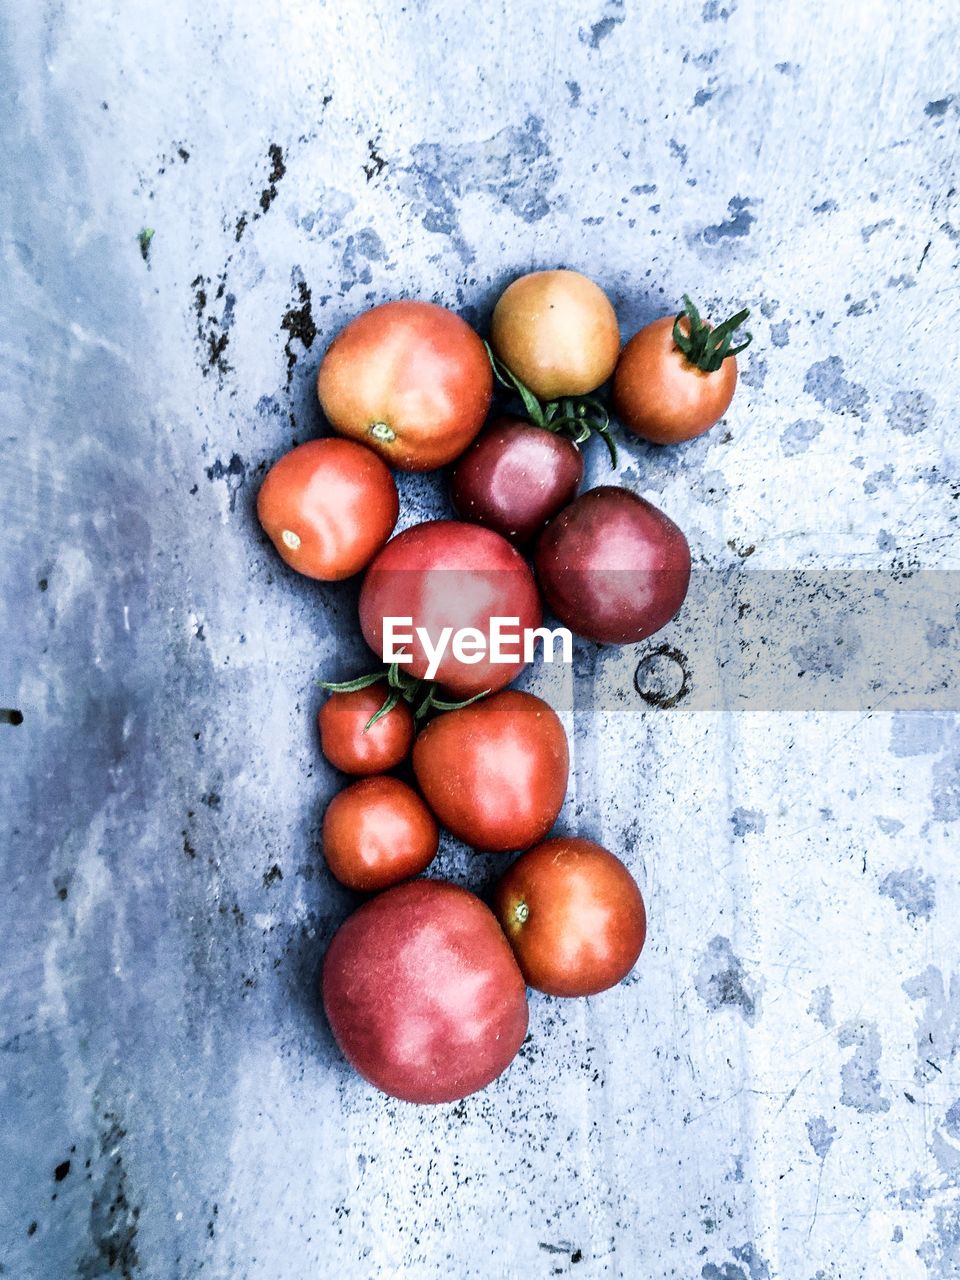 HIGH ANGLE VIEW OF TOMATOES ON FLOOR